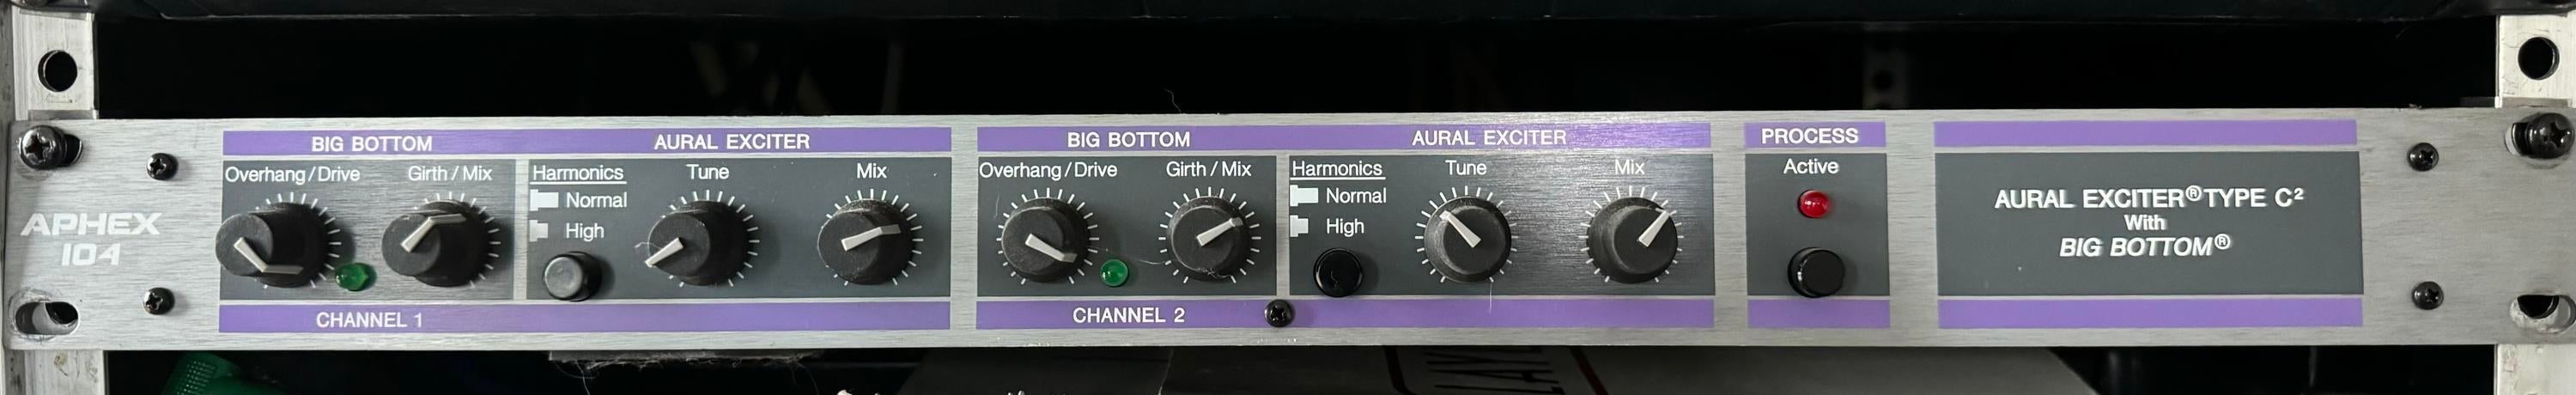 Used Aphex 104 Aural Exciter Type C2 with BIG BOTTOM